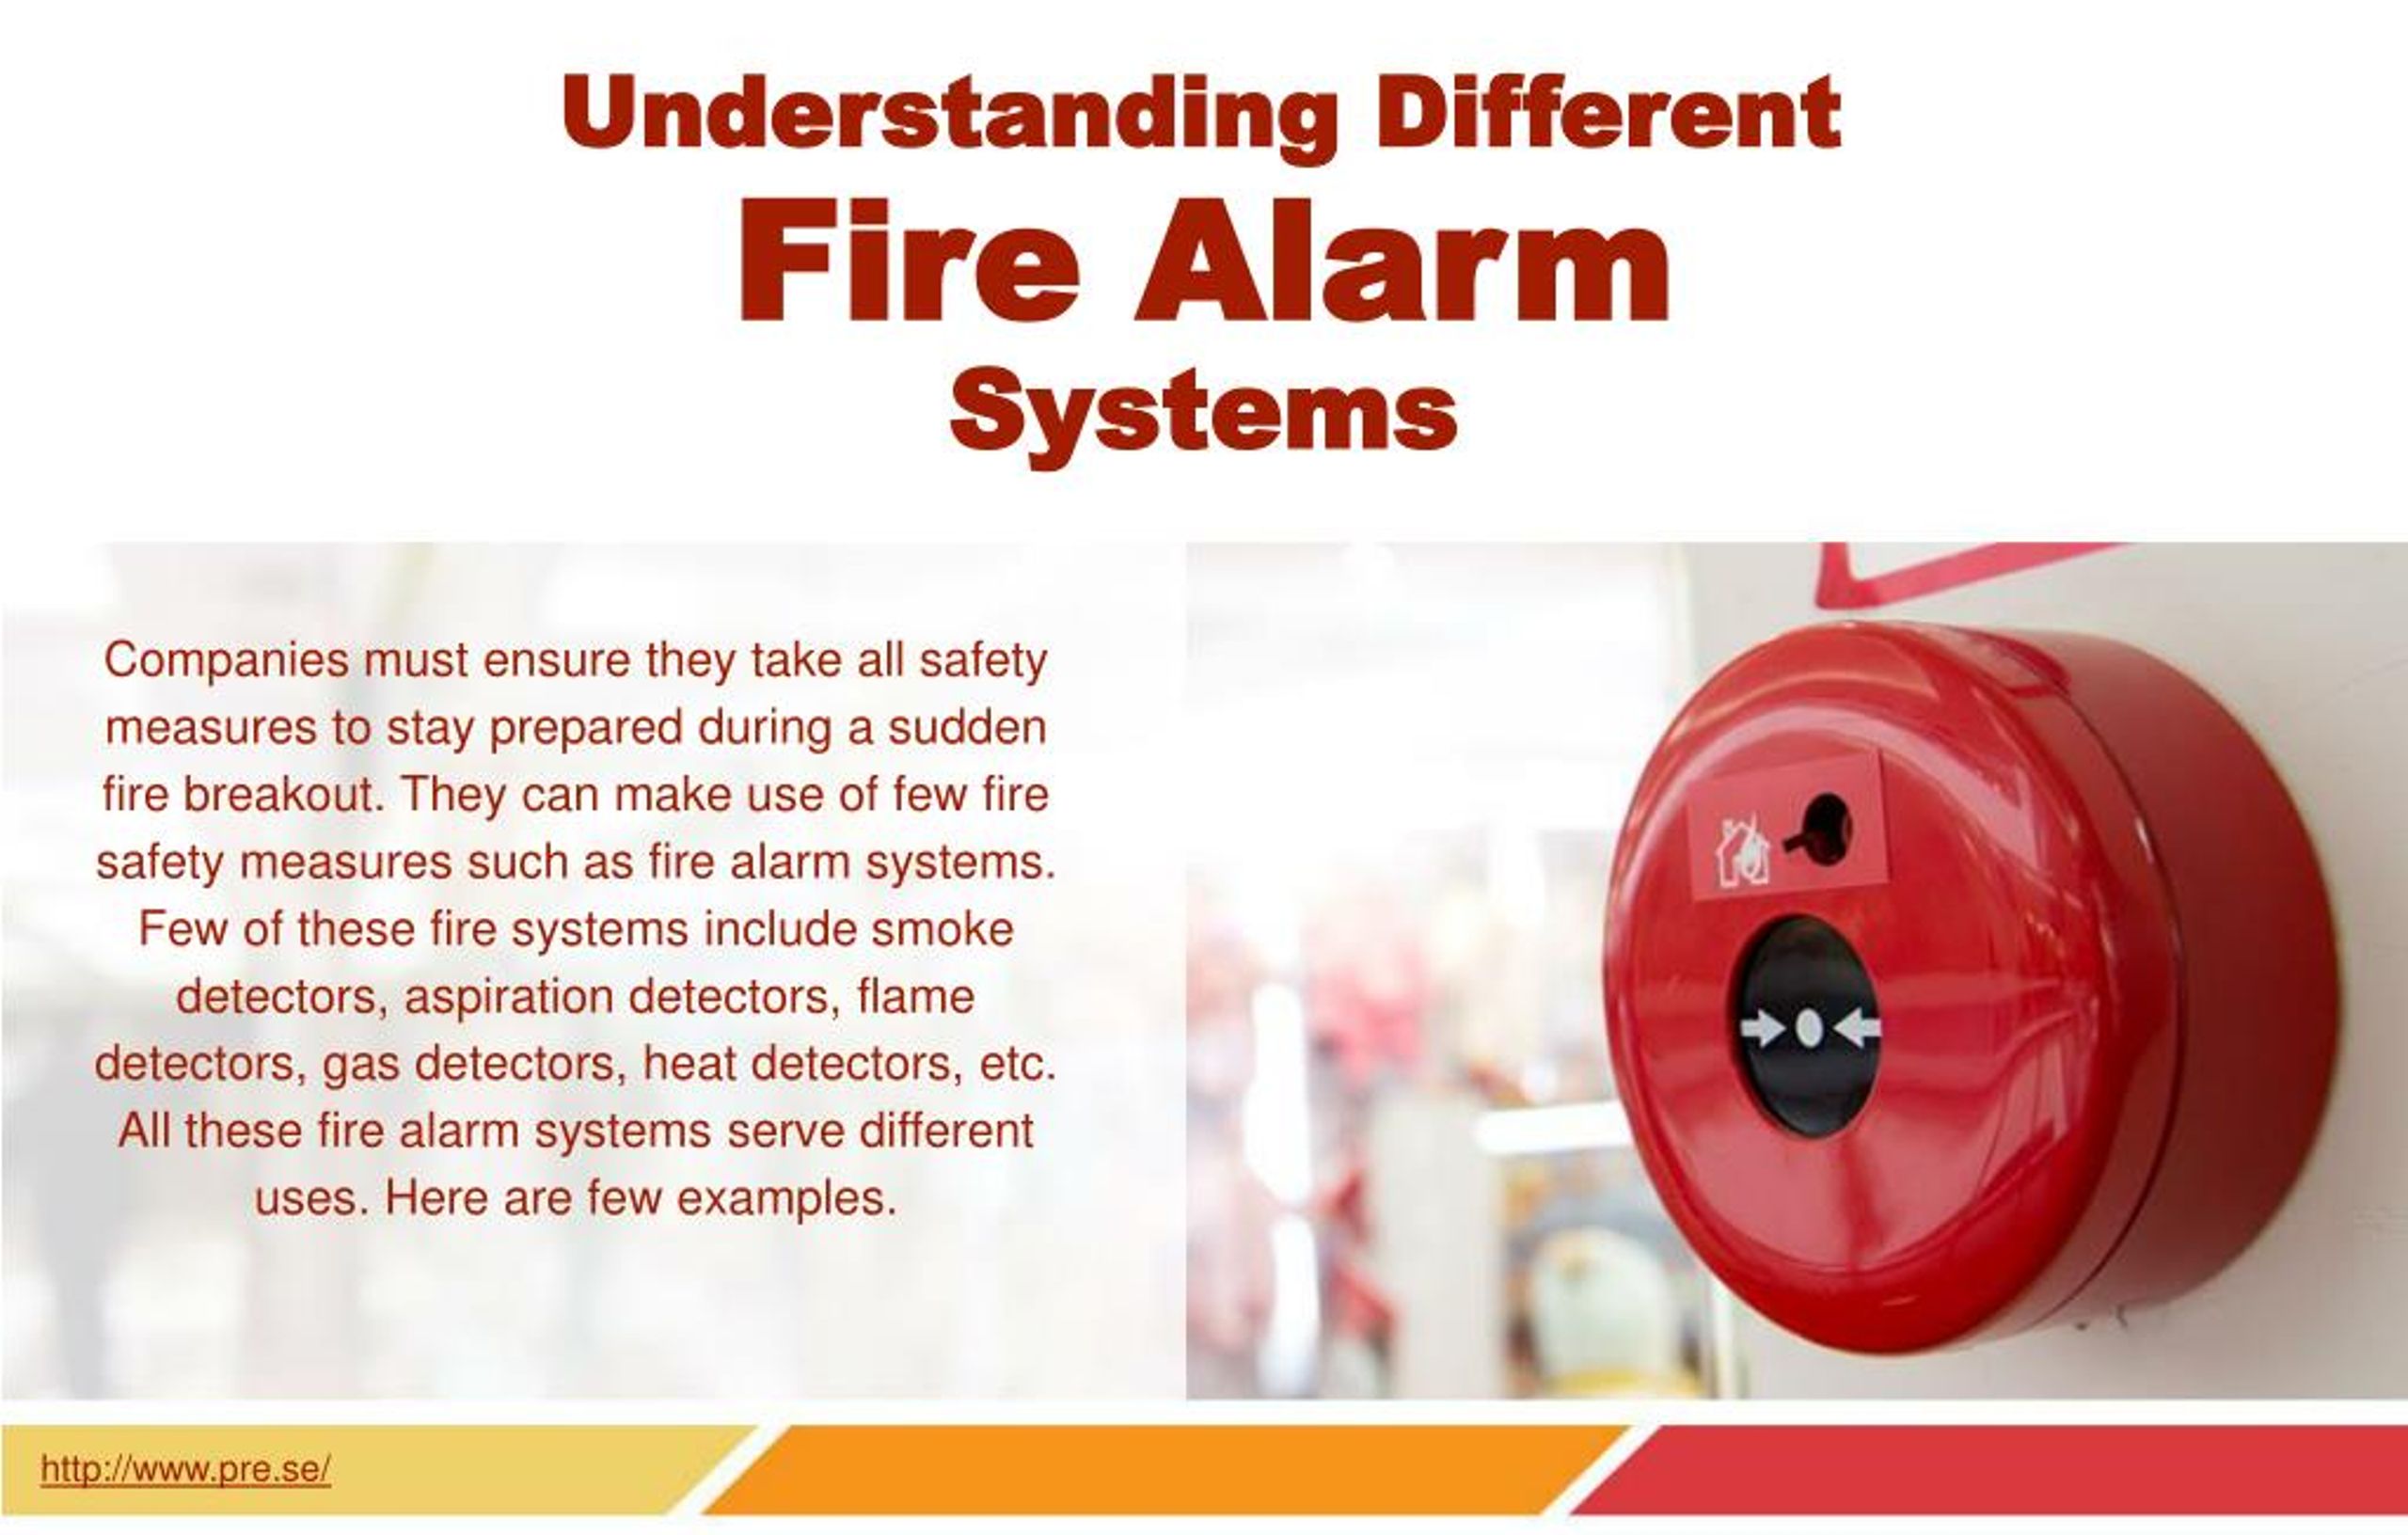 powerpoint presentation on fire detection and alarm system